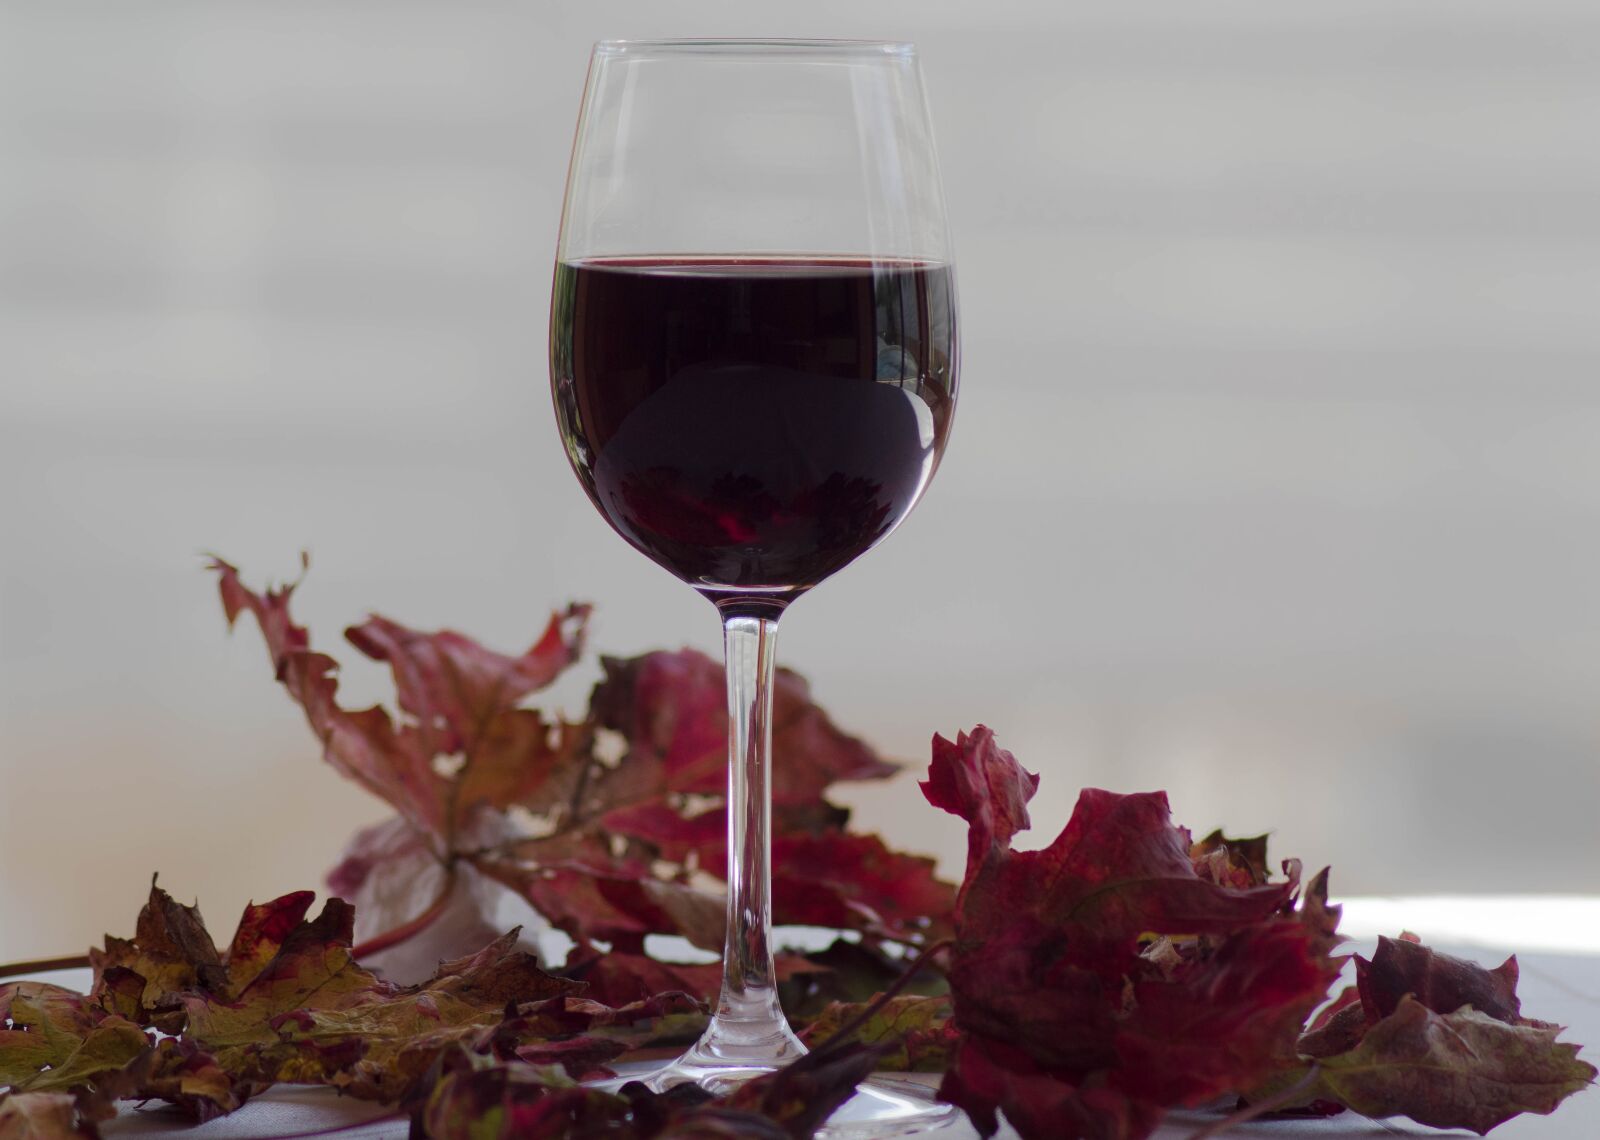 Pentax KP sample photo. Glass, wine, leaves photography